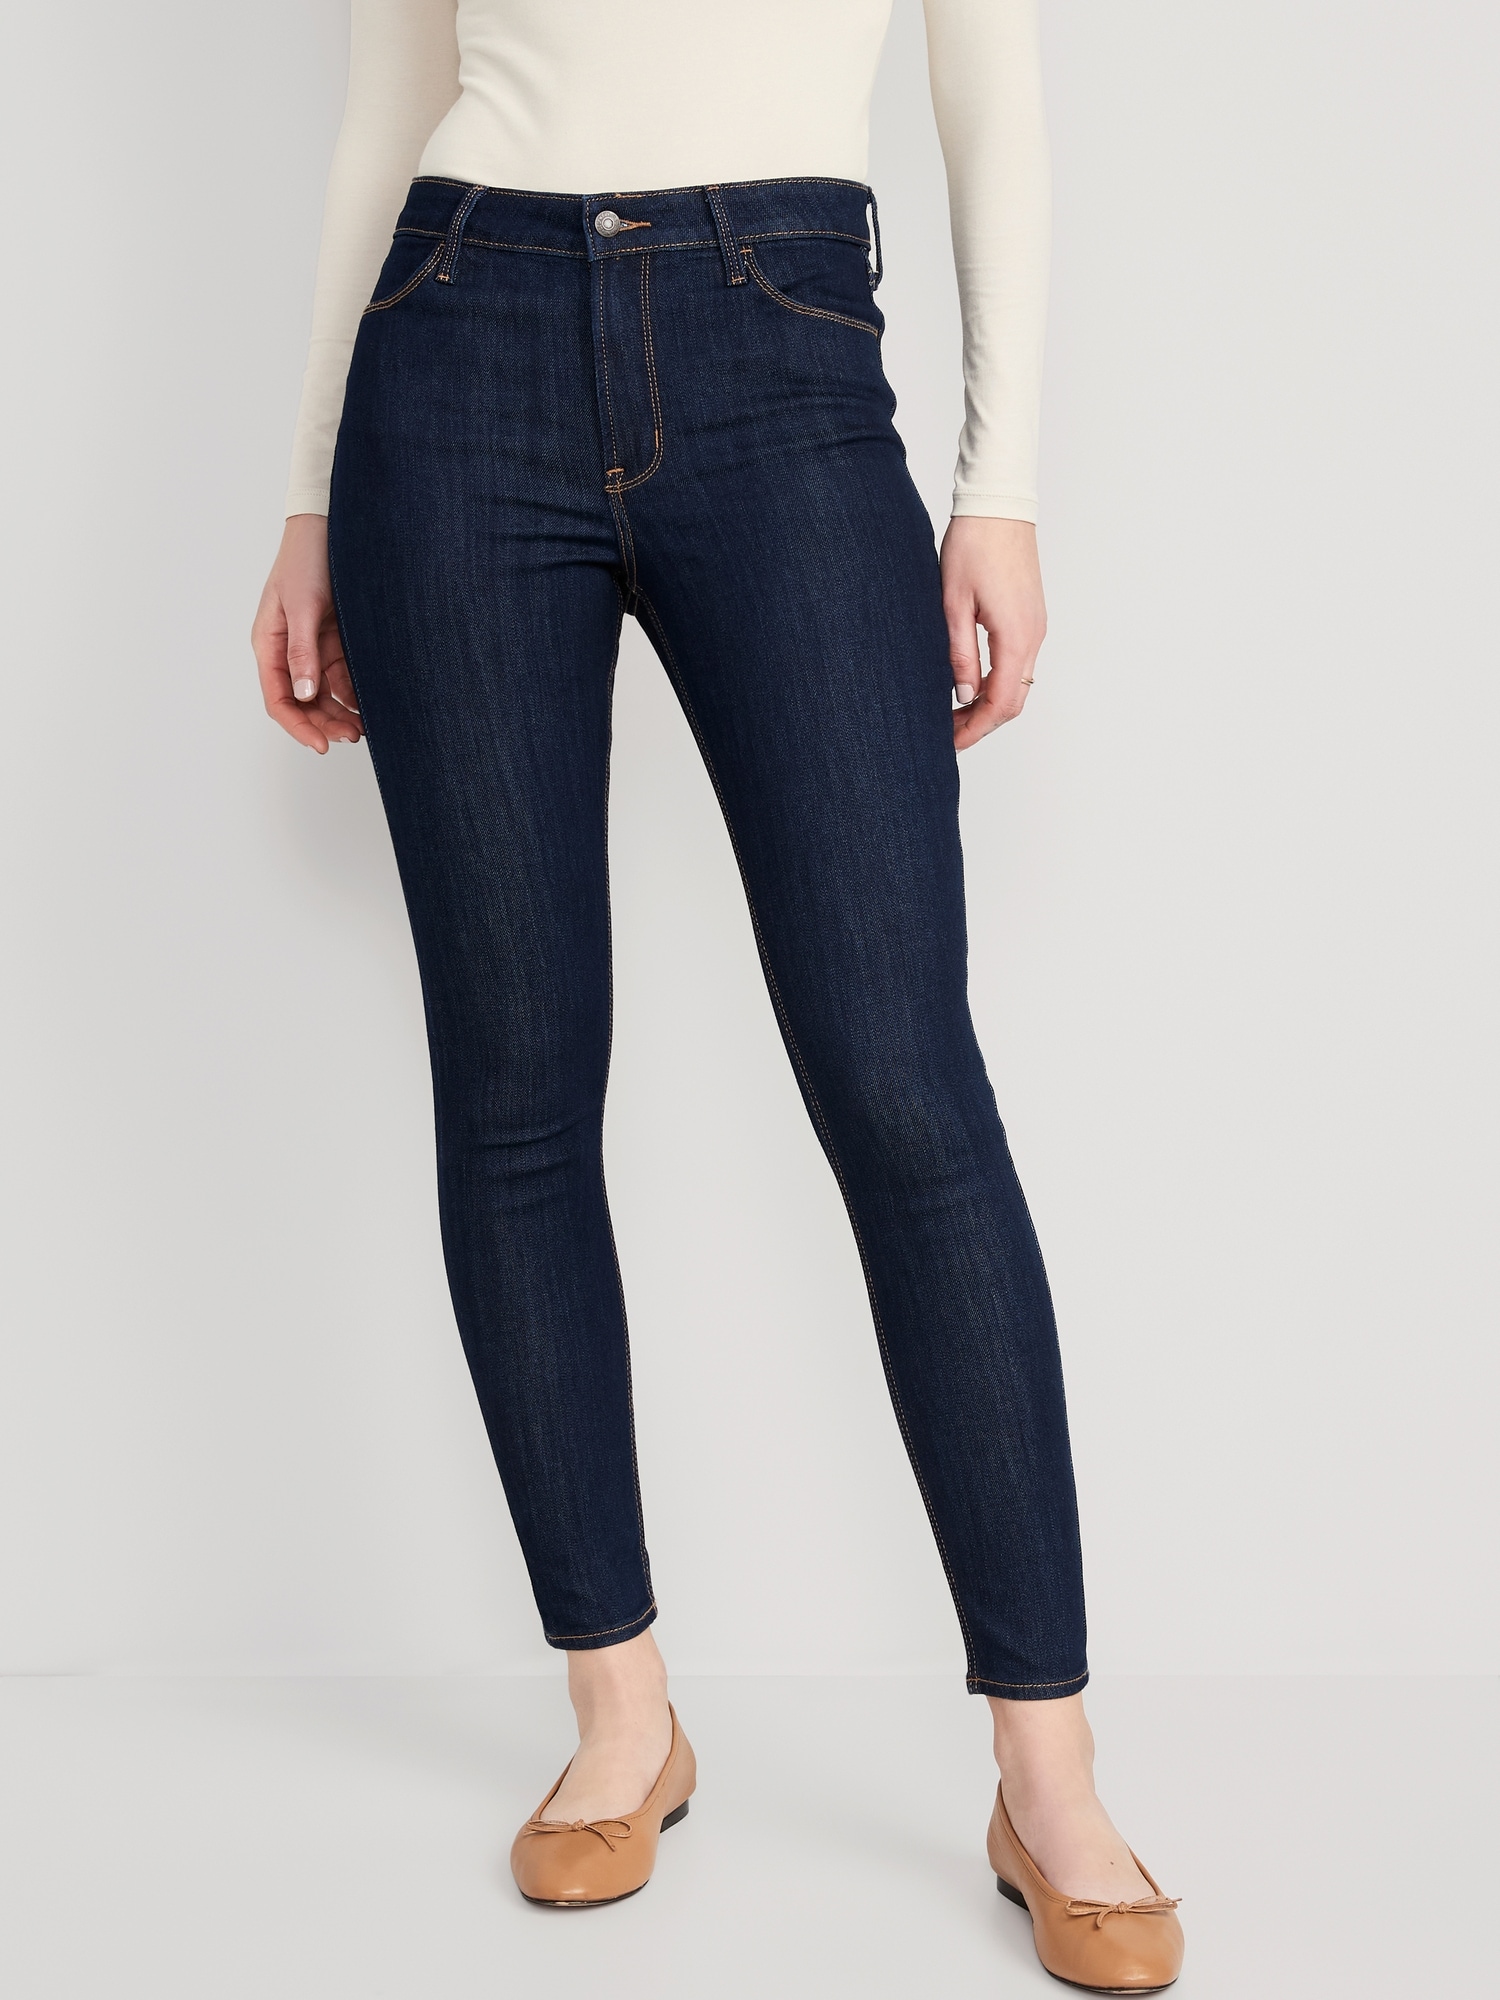 High Waisted Wow Super Skinny Jeans For Women Old Navy